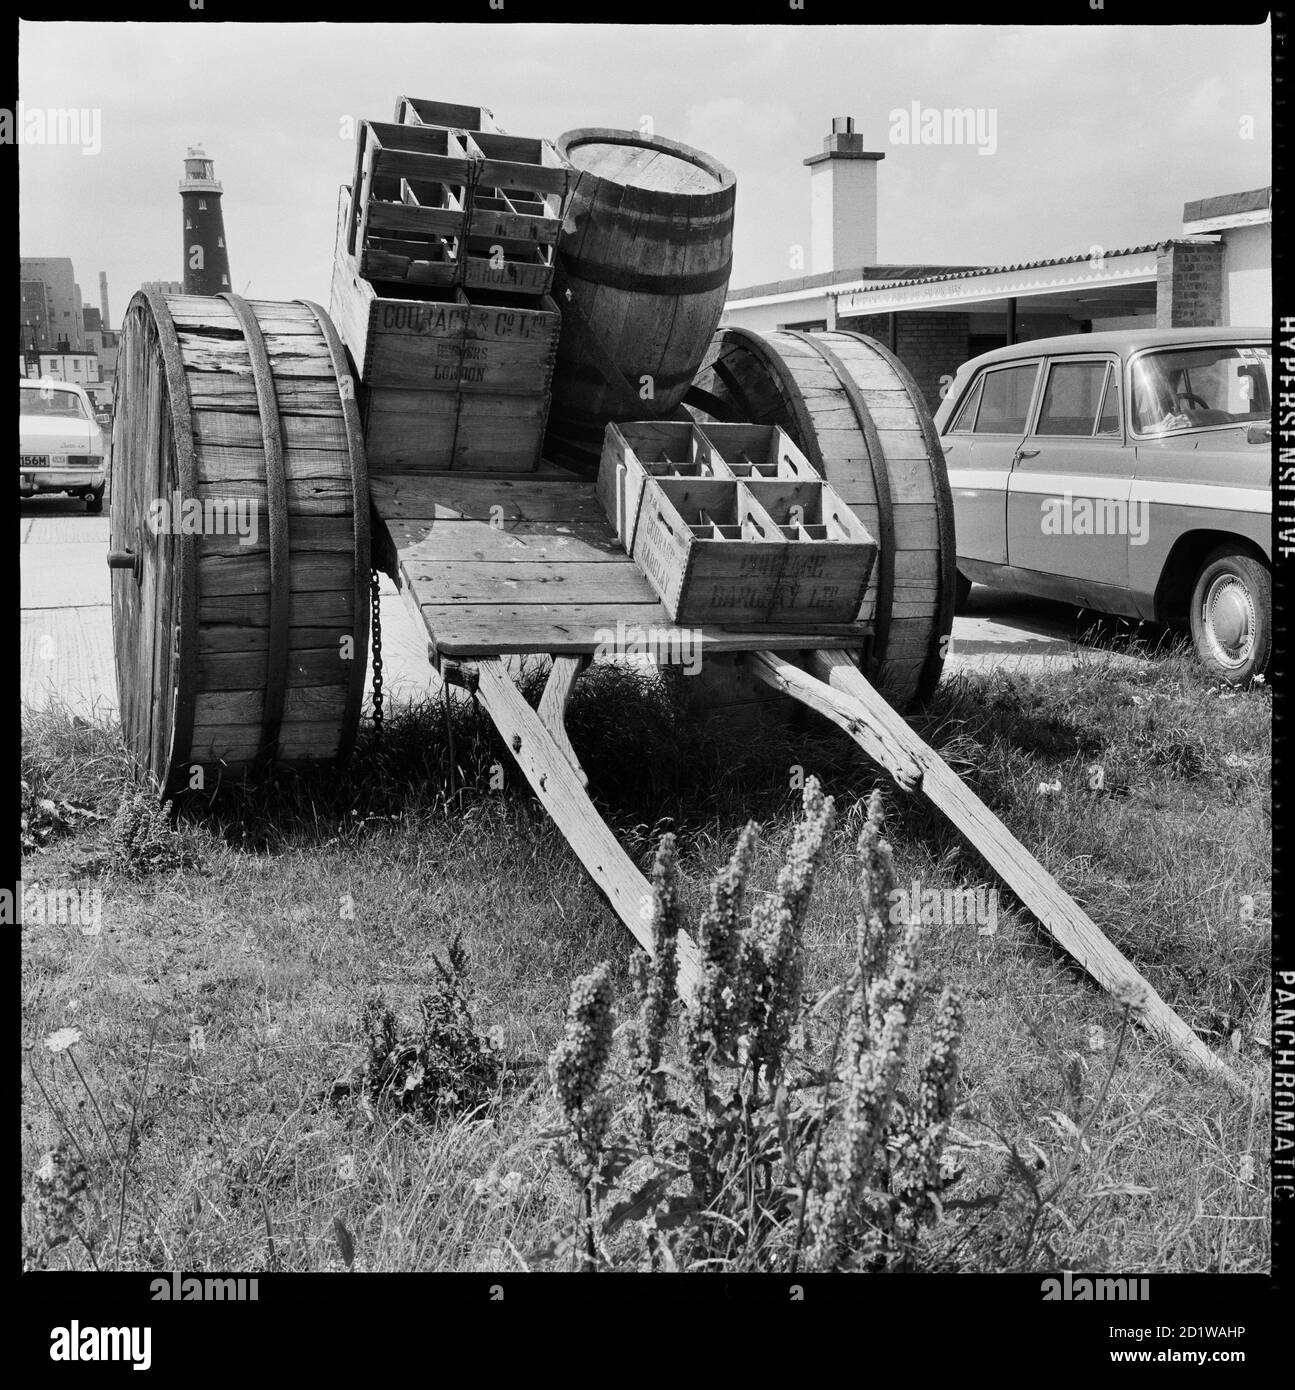 Dungeness, Lydd, Shepway, Kent. A horse-drawn cart loaded with beer crates and a barrel on display in the car park beside Dungeness Old Lighthouse    The cart was used to deliver beer the public houses of Dungeness before the building of a road across the beach. Stock Photo